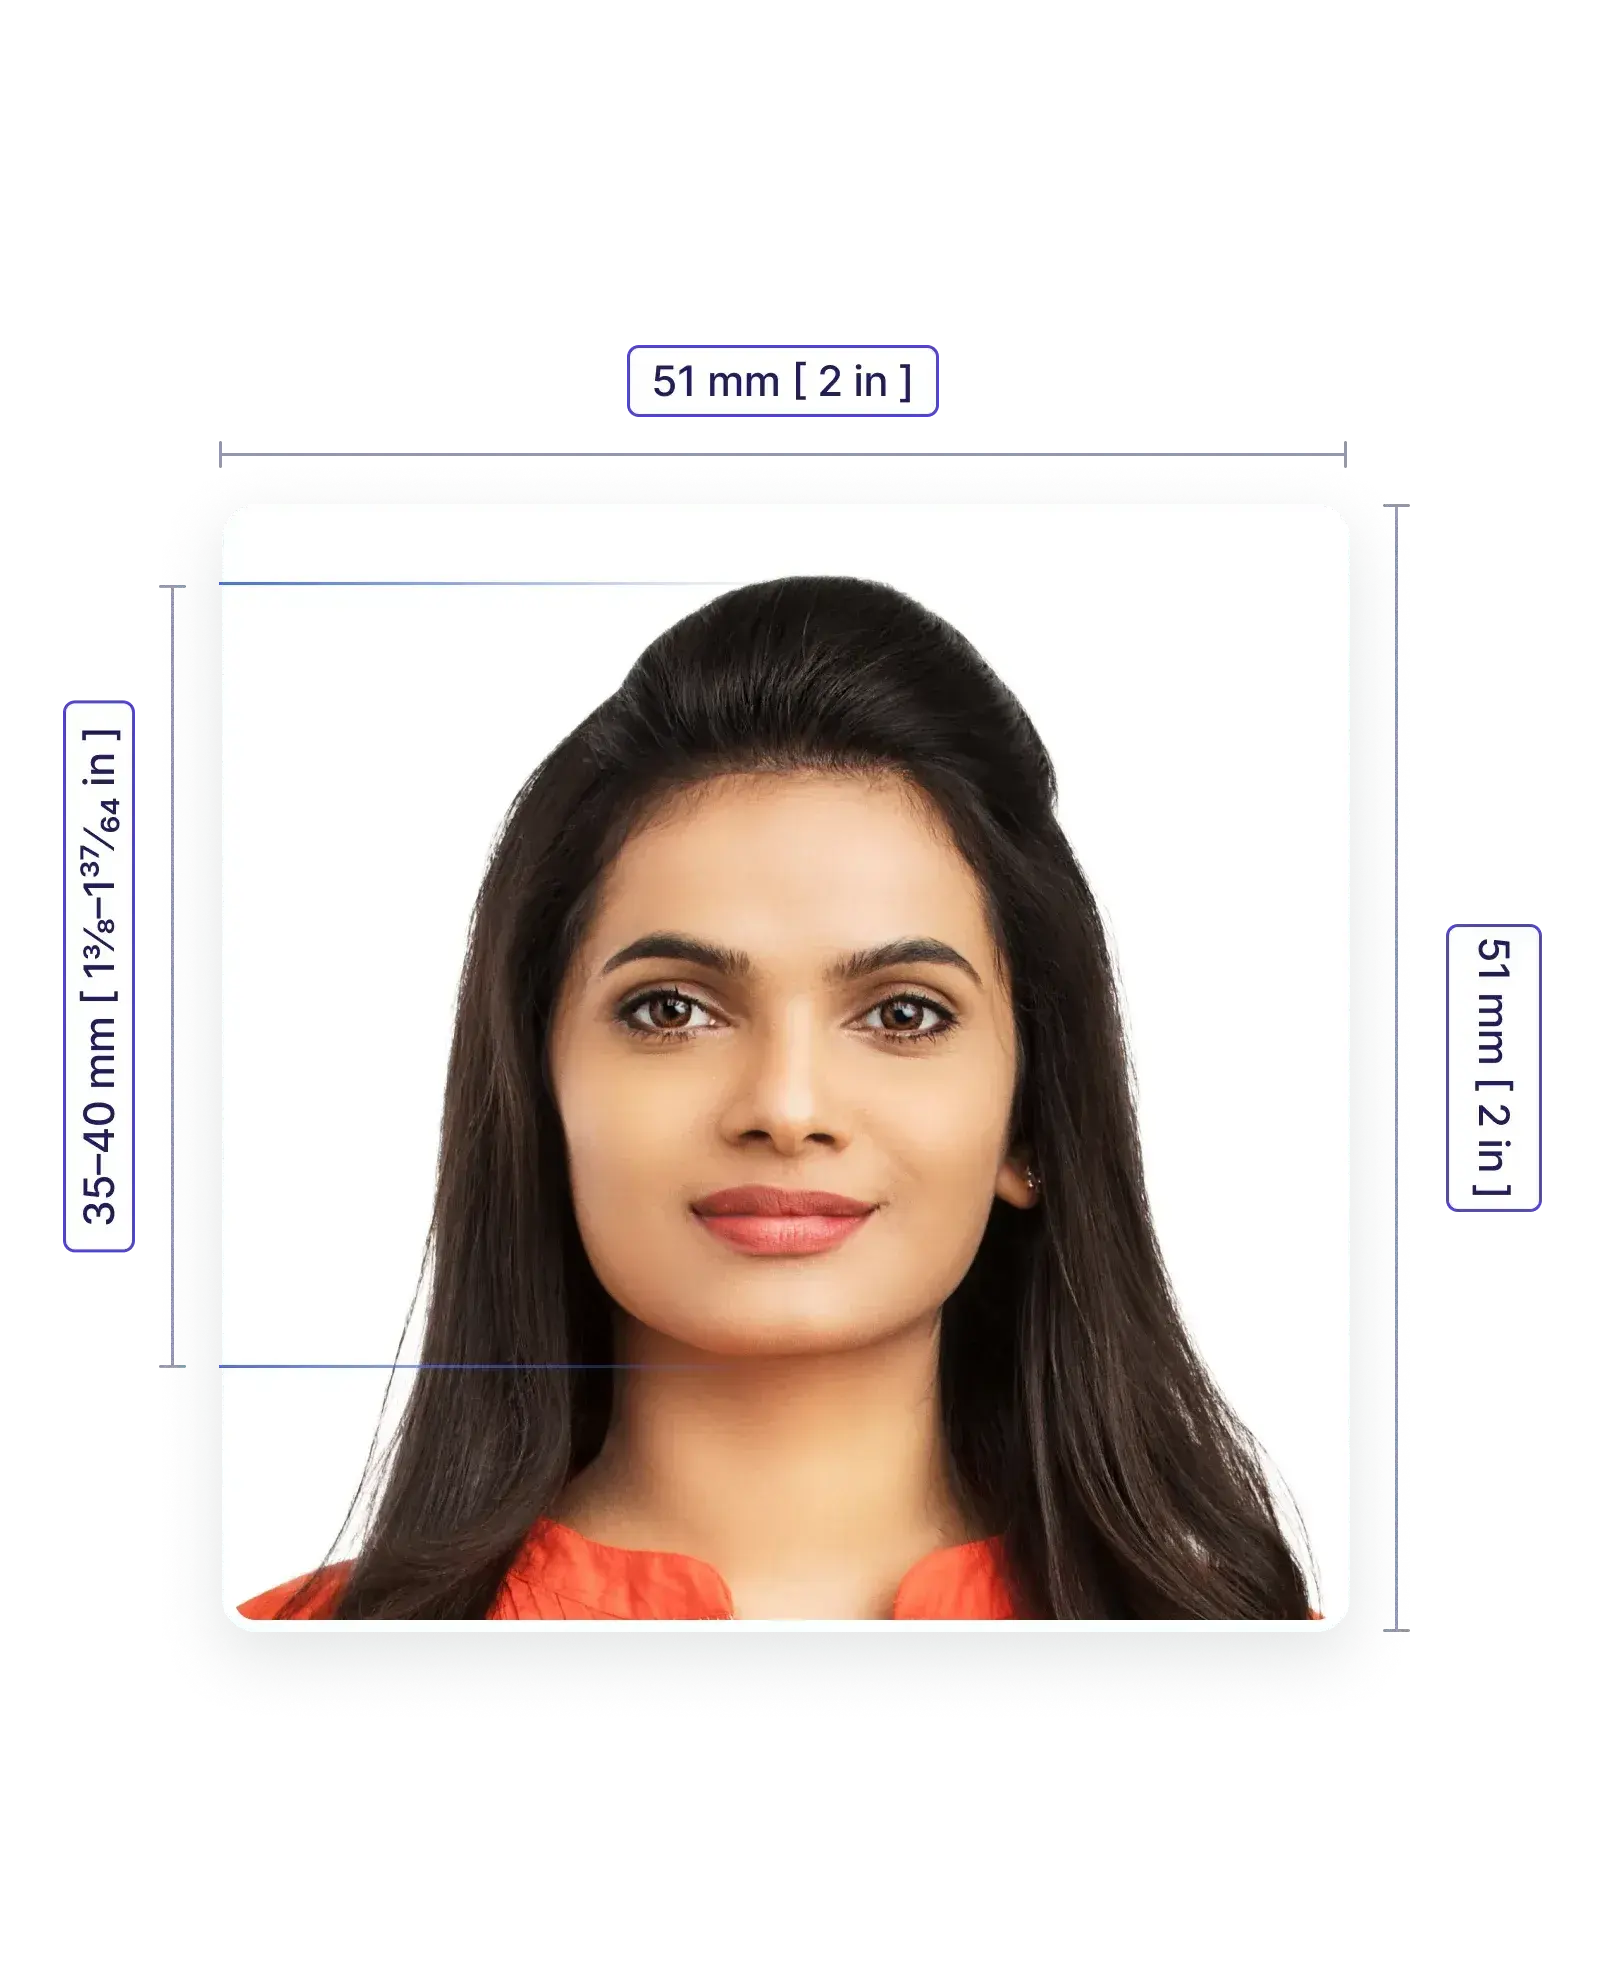 Indian Visa Photo Size & Requirements